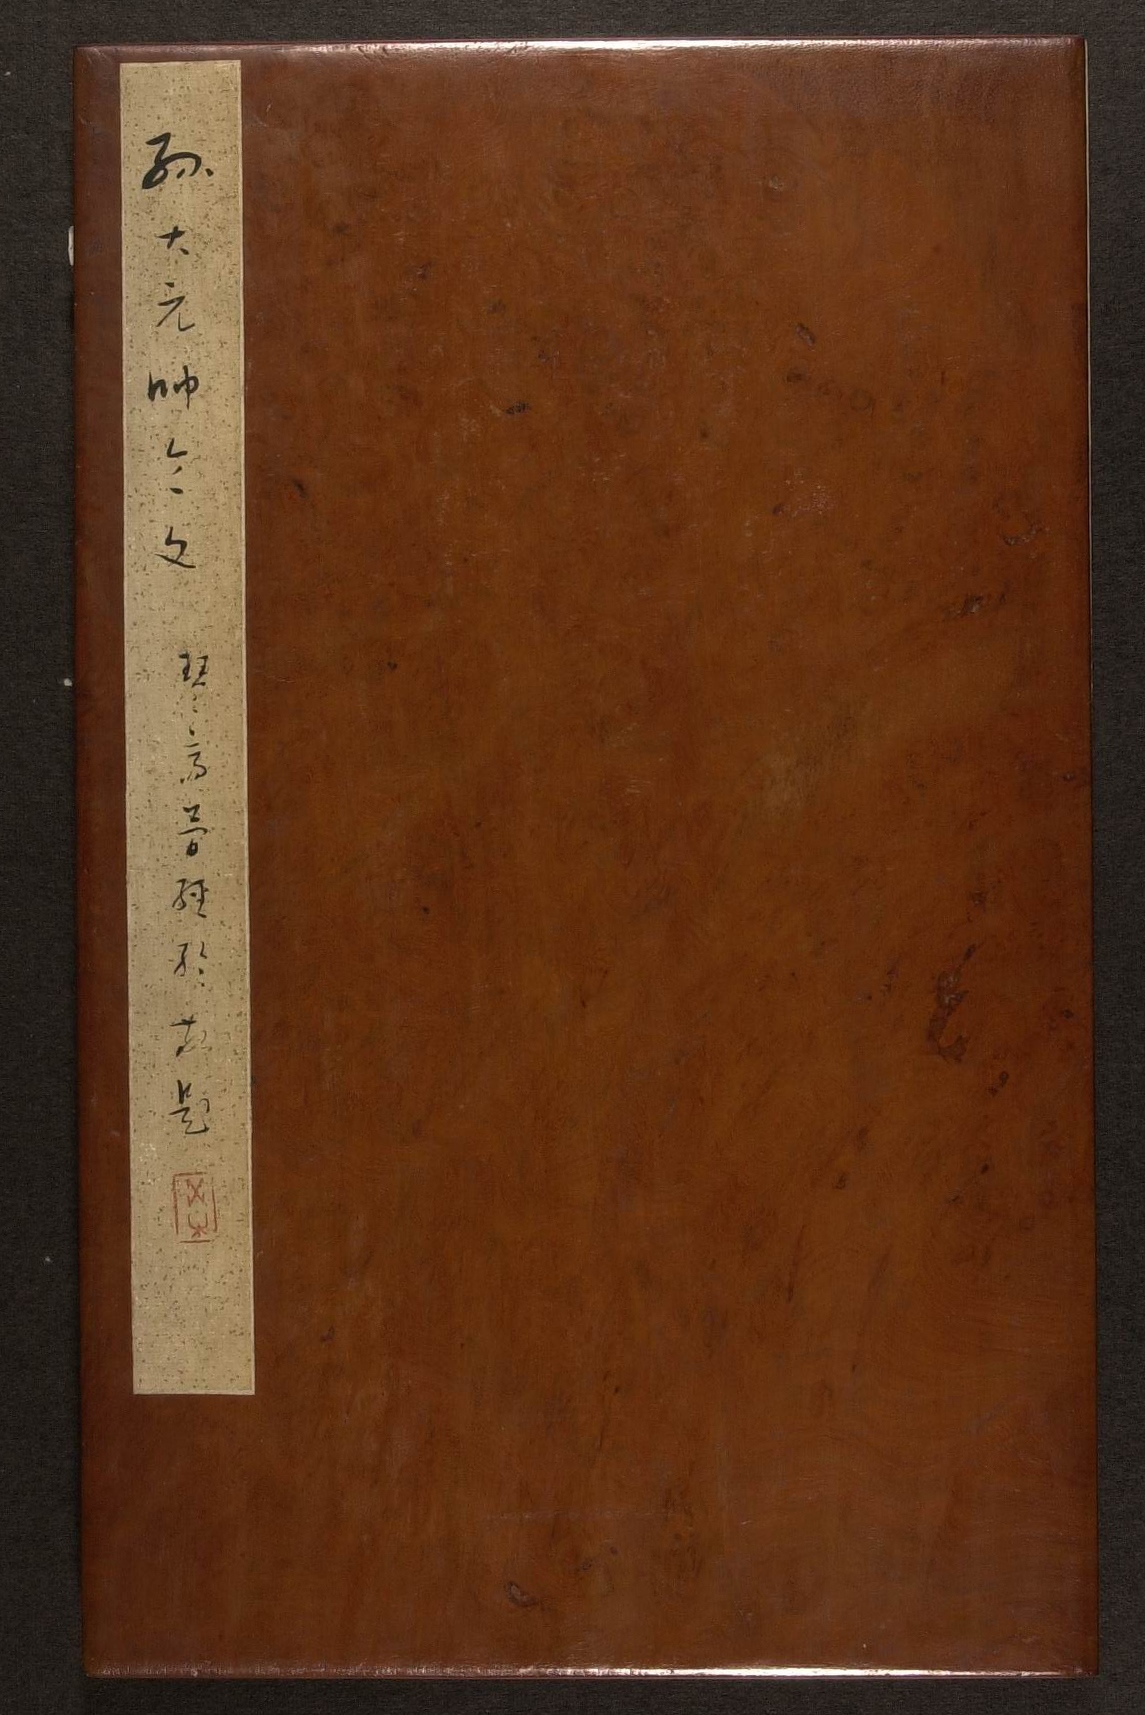 Orders issued by Dr Sun Yat-sen, 1866 to 1925. Donated by Ms Lau Sui Peng, Maria